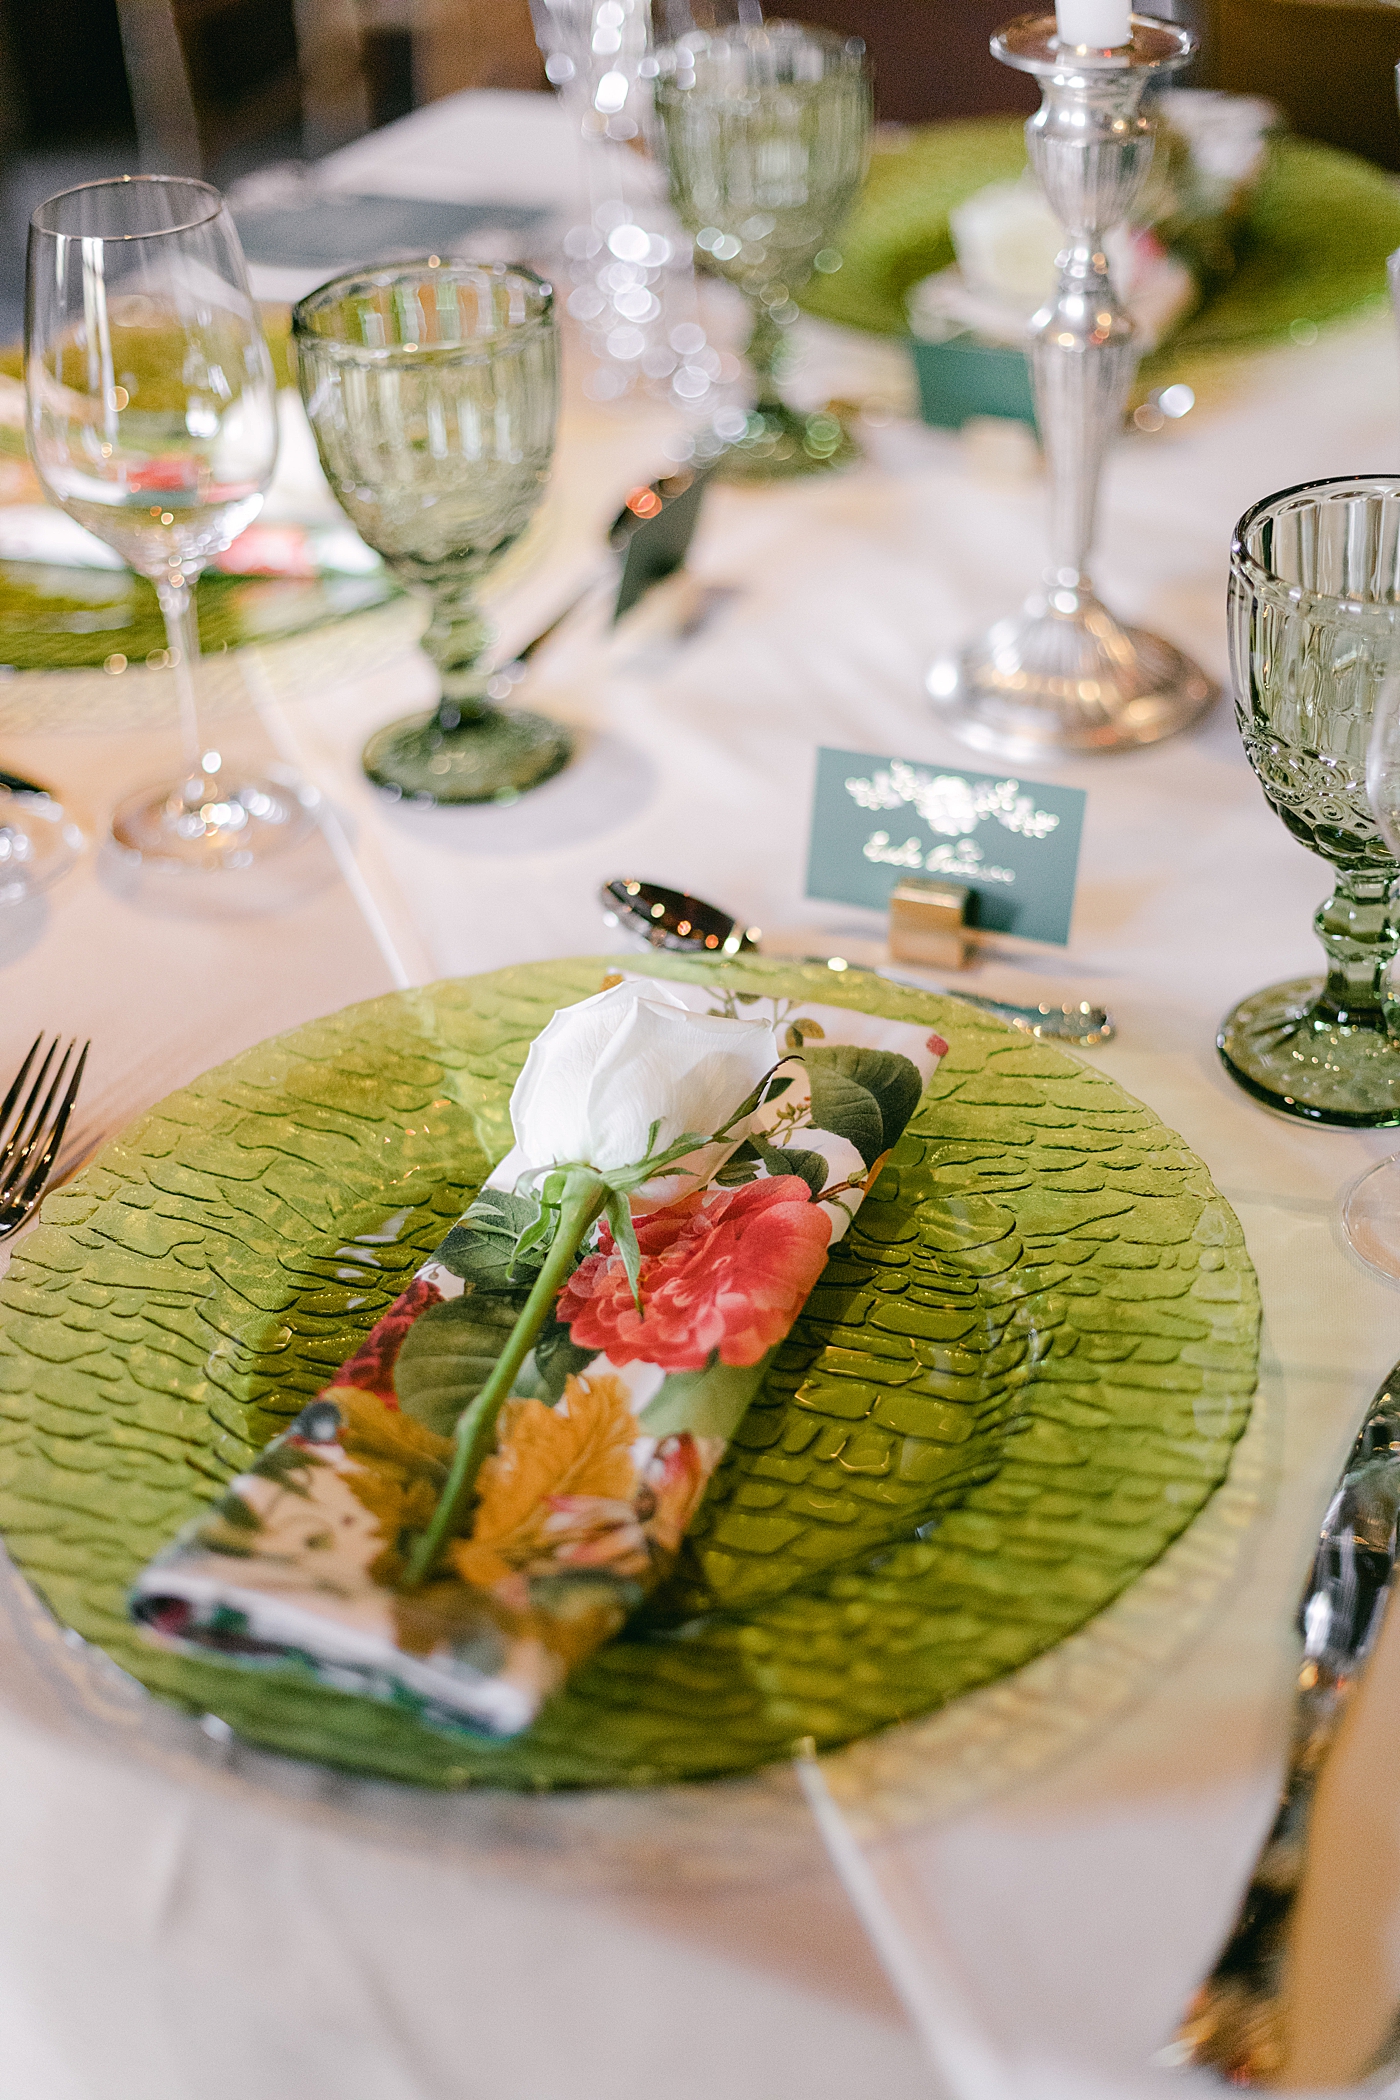 Detail of place setting with green plate and floral napkin | Image by Hope Helmuth Photography